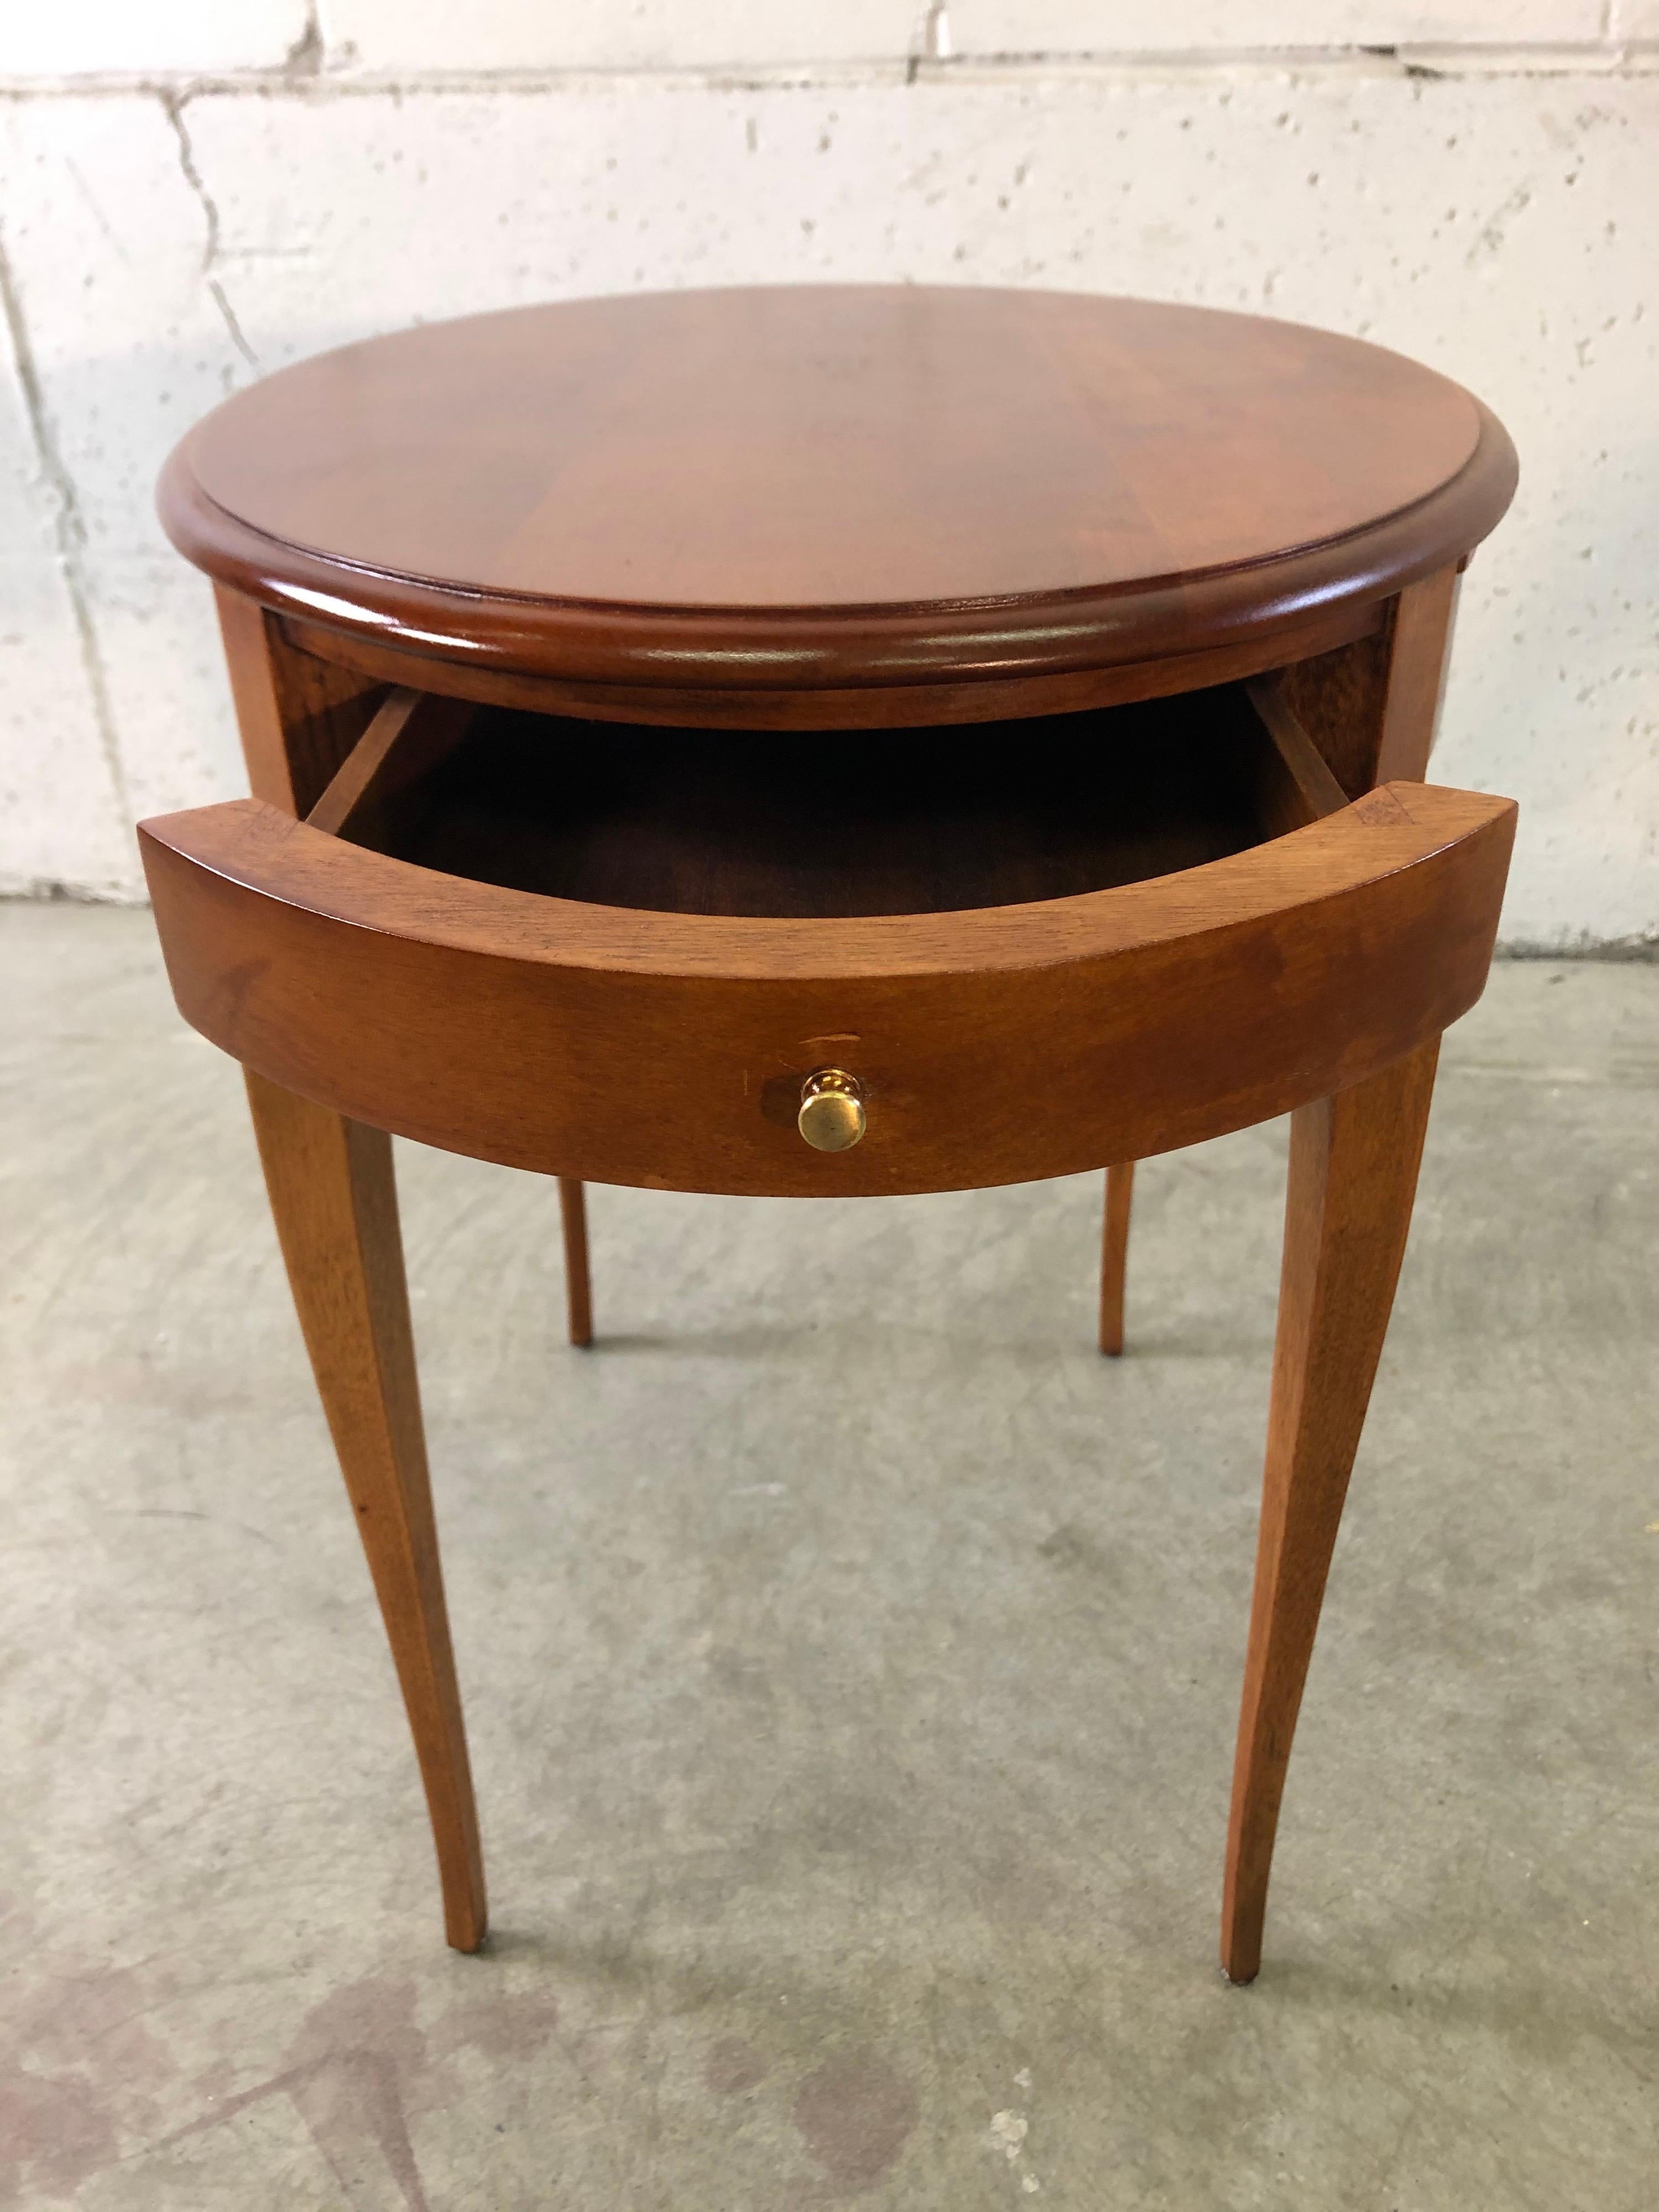 20th Century Vintage Oval Maple Wood Side Table For Sale